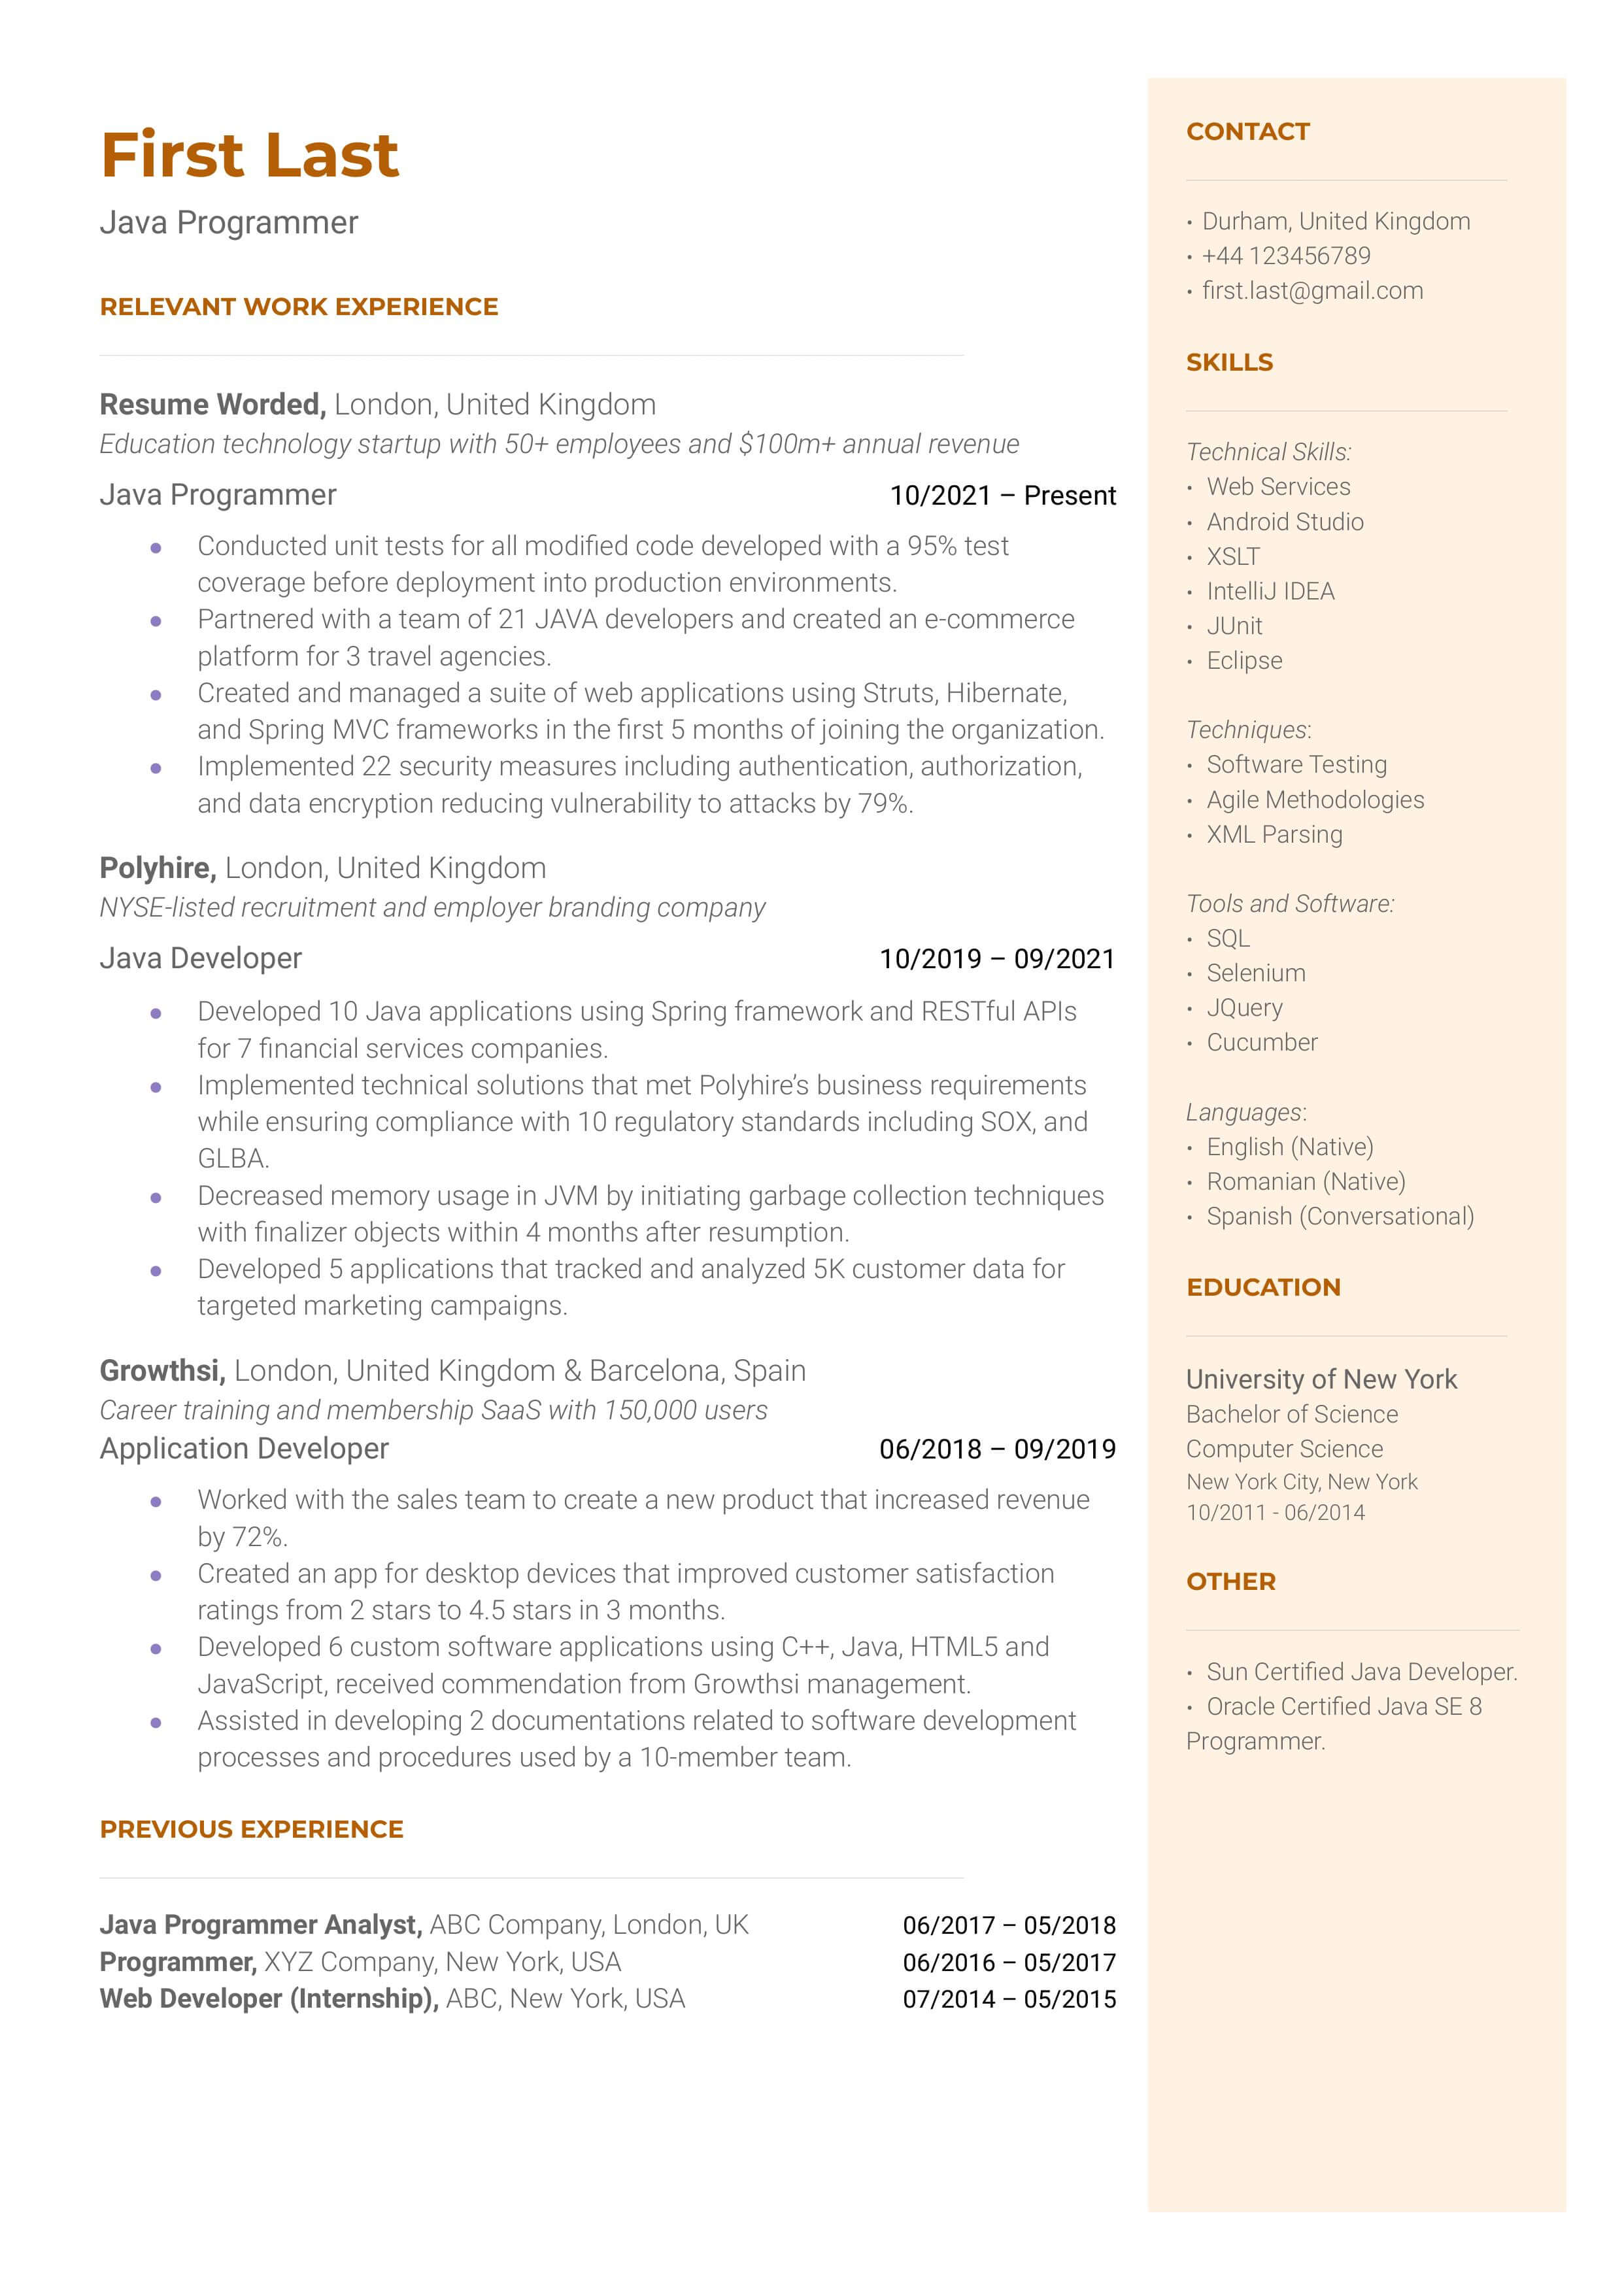 A resume template that highlights previous professional experience as a Java Programmer